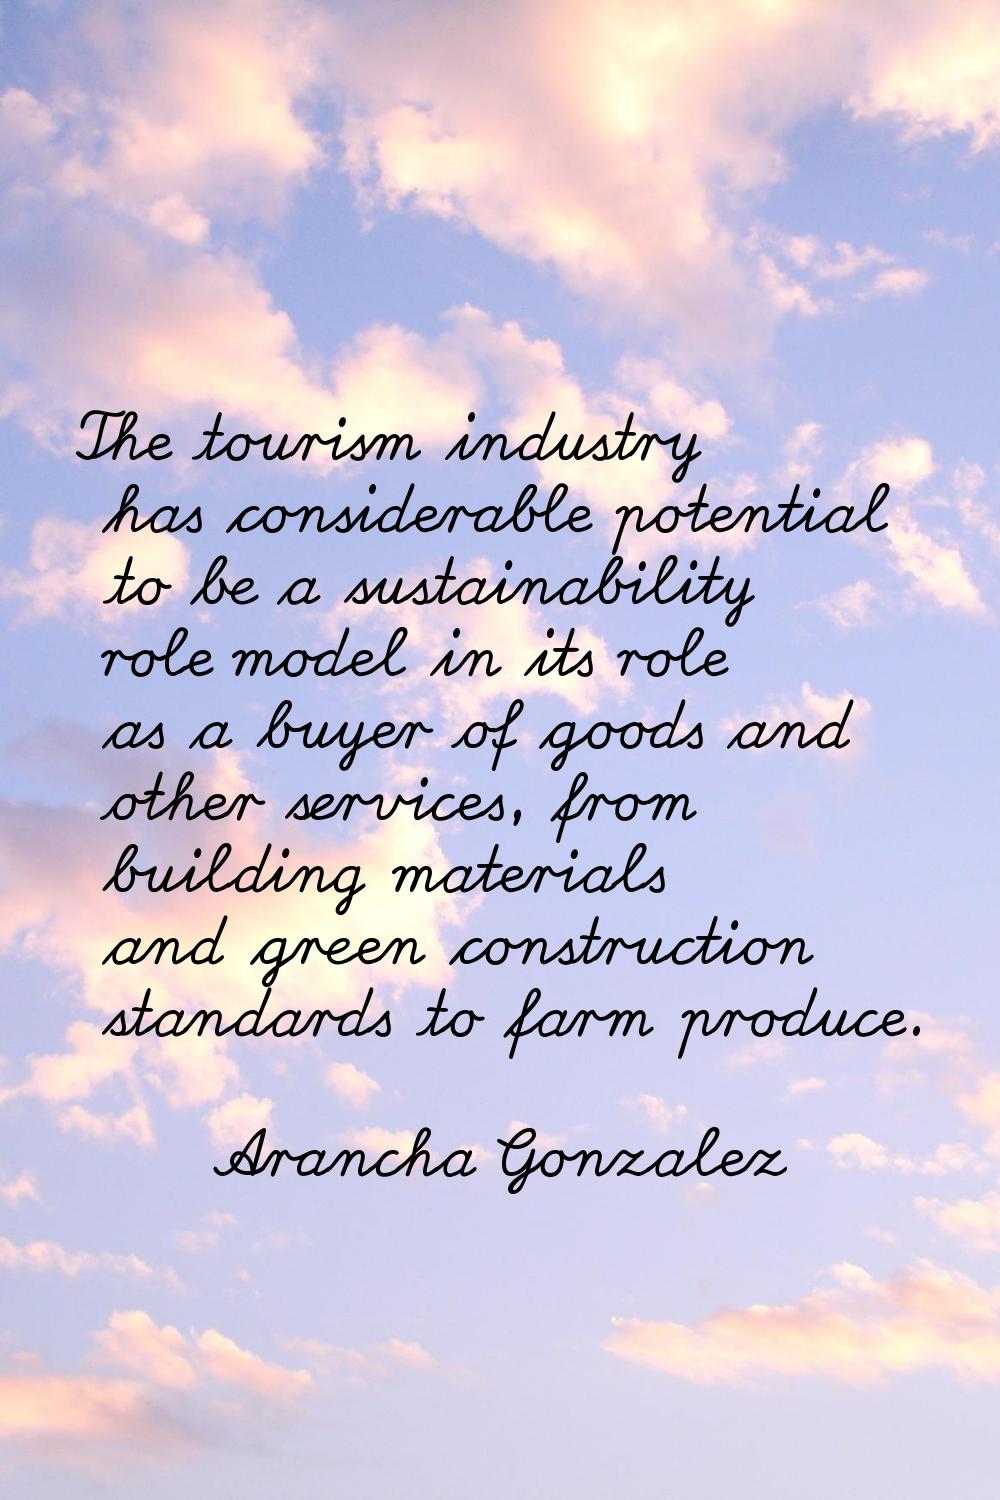 The tourism industry has considerable potential to be a sustainability role model in its role as a 